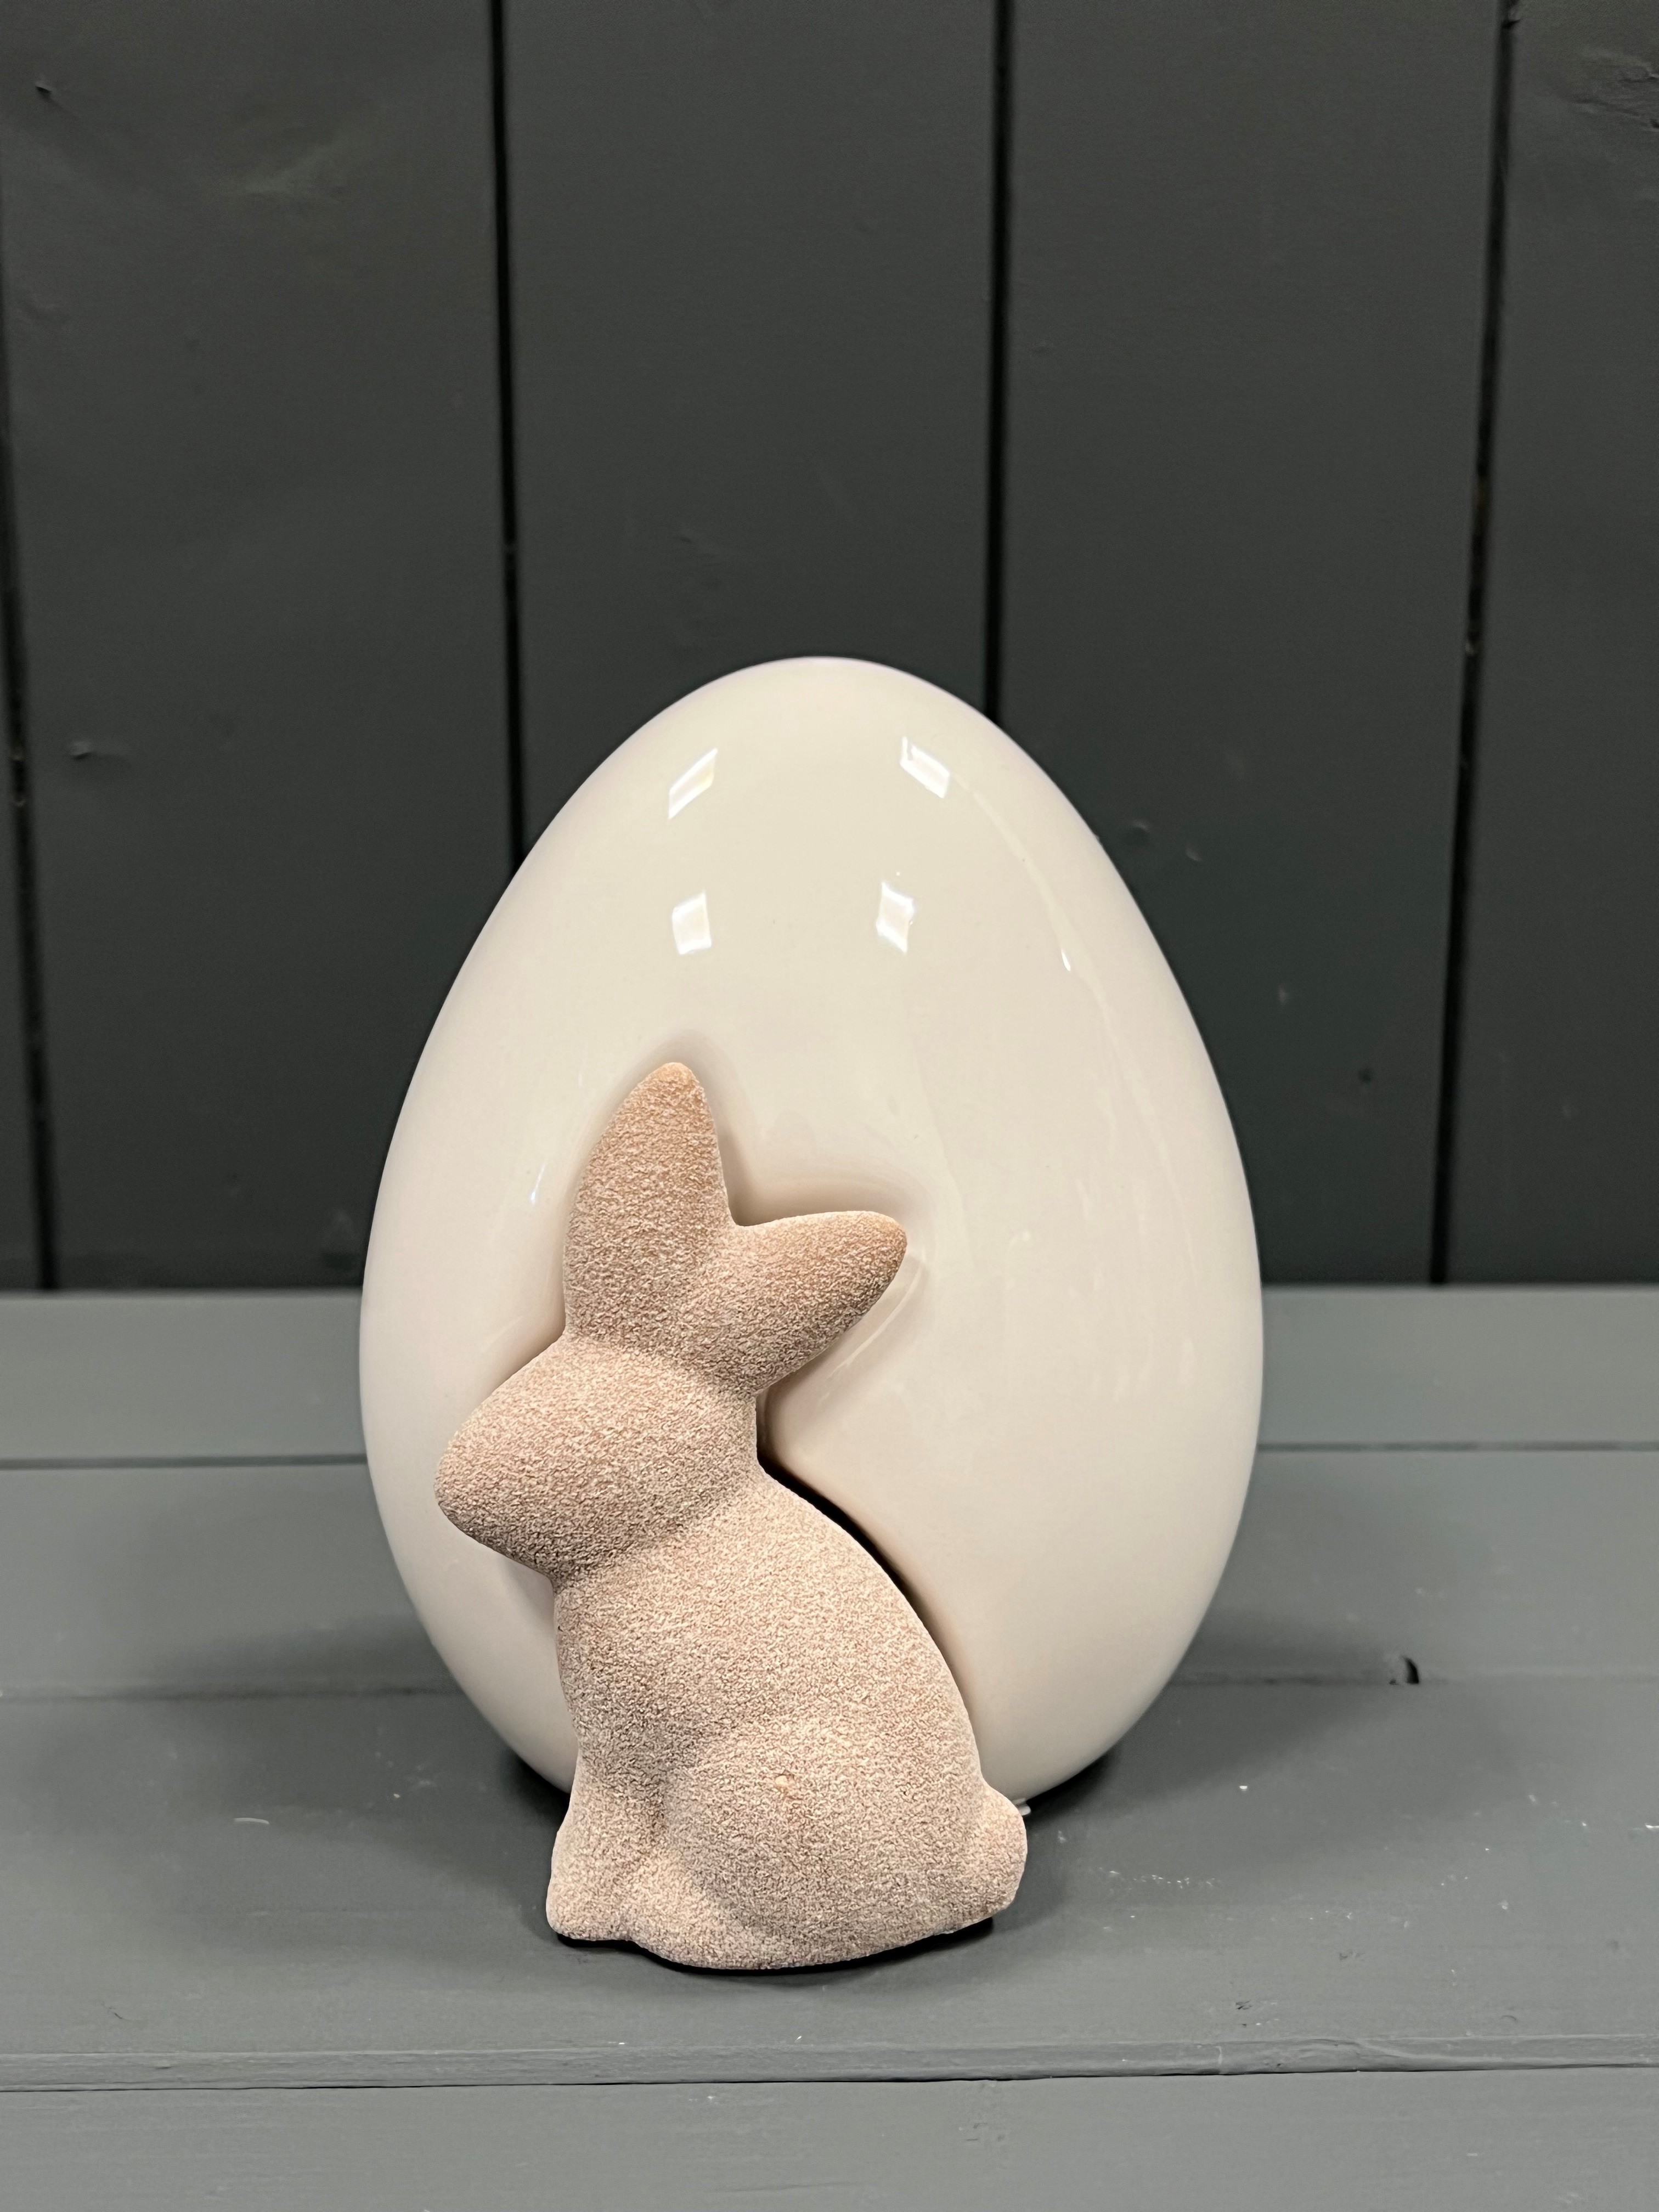 Ceramic White Egg with Rabbit Ornament detail page